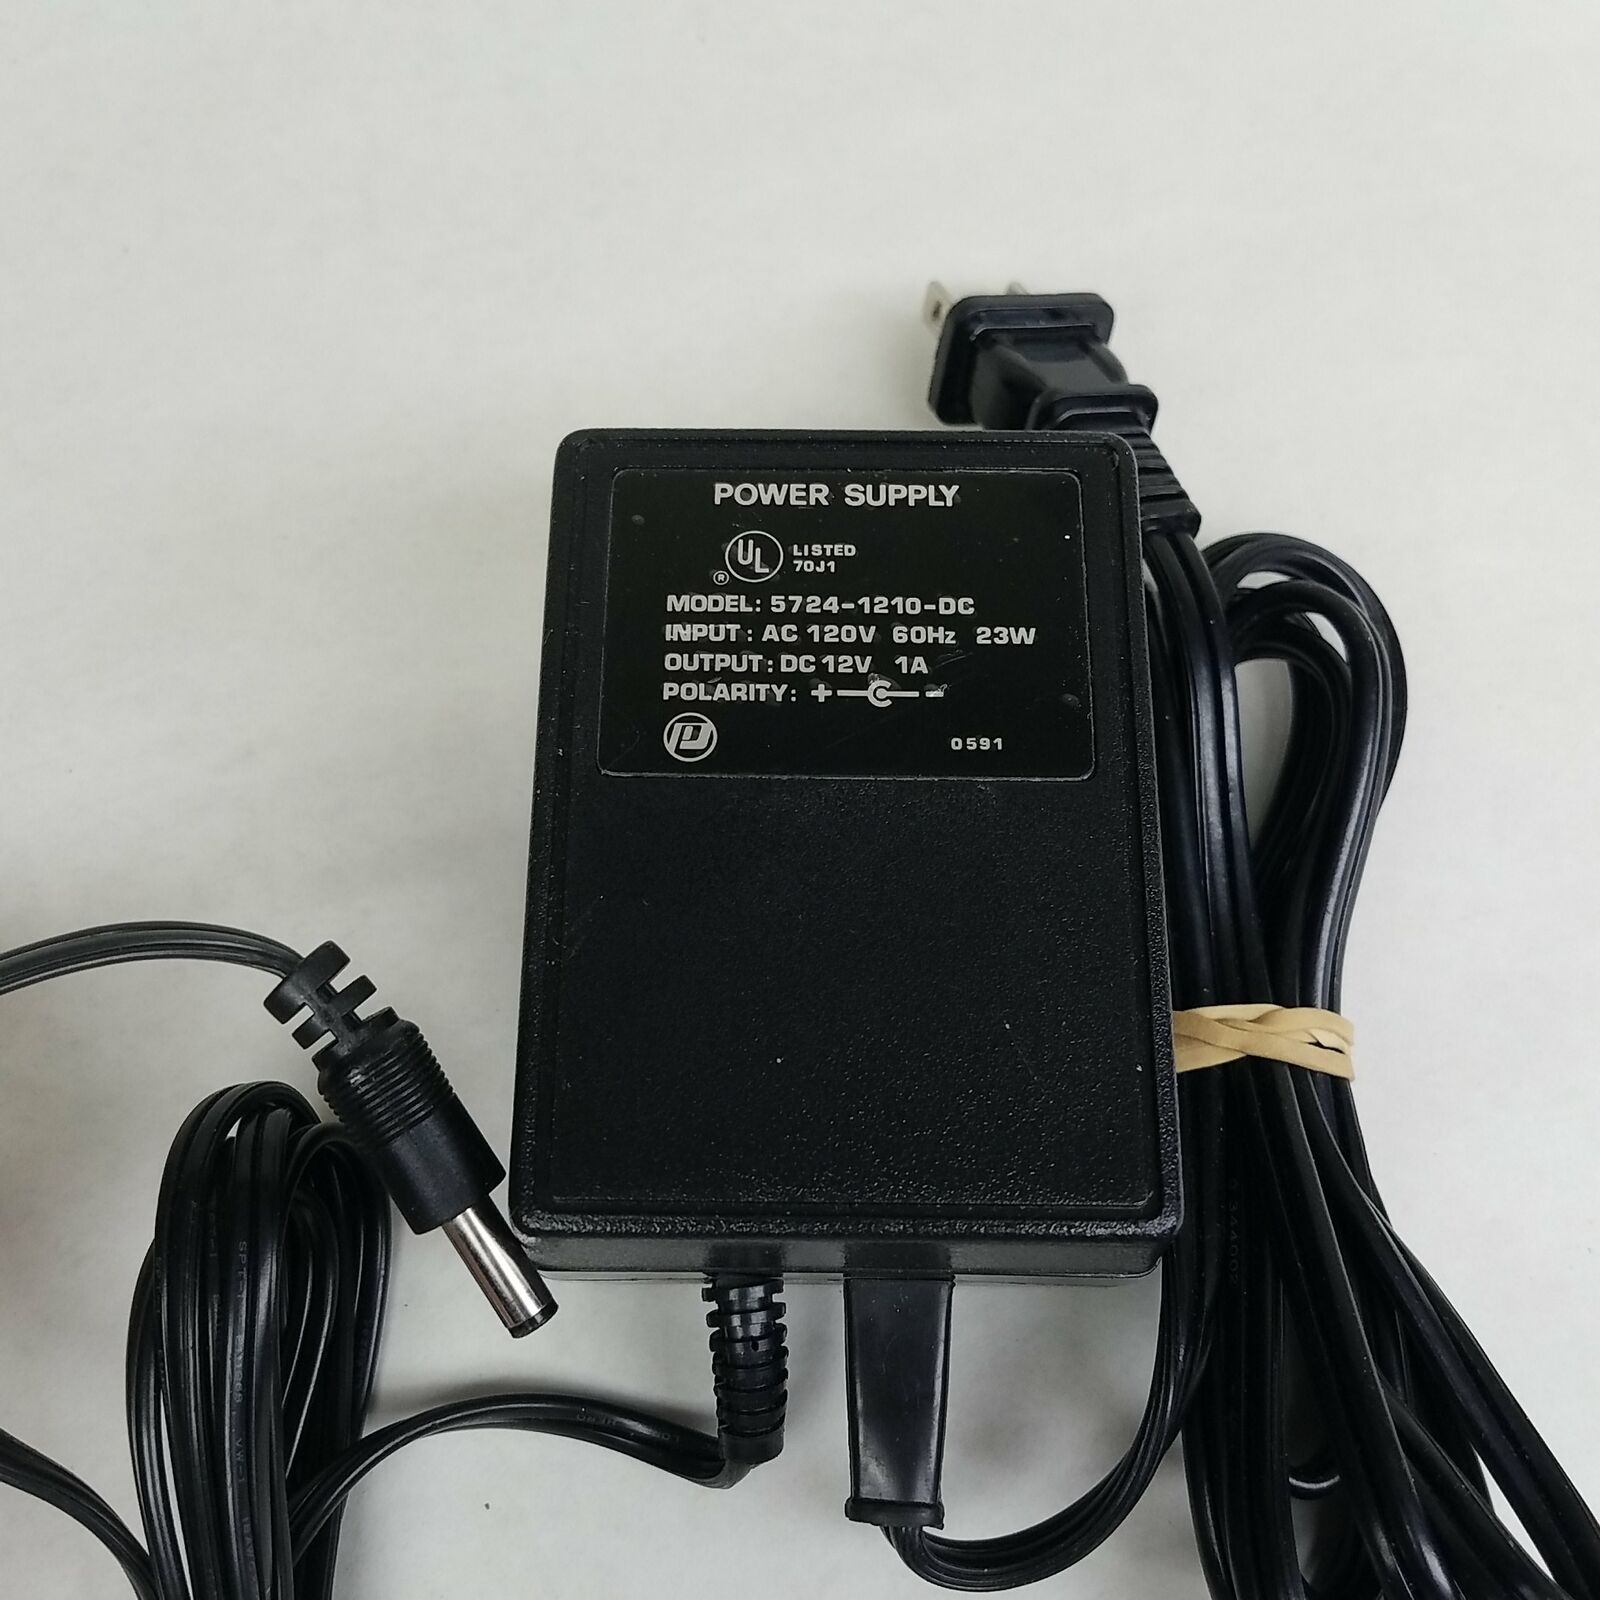 NEW 12VDC 1A AC Power Supply 5724-1210-DC Charger Adapter - Click Image to Close